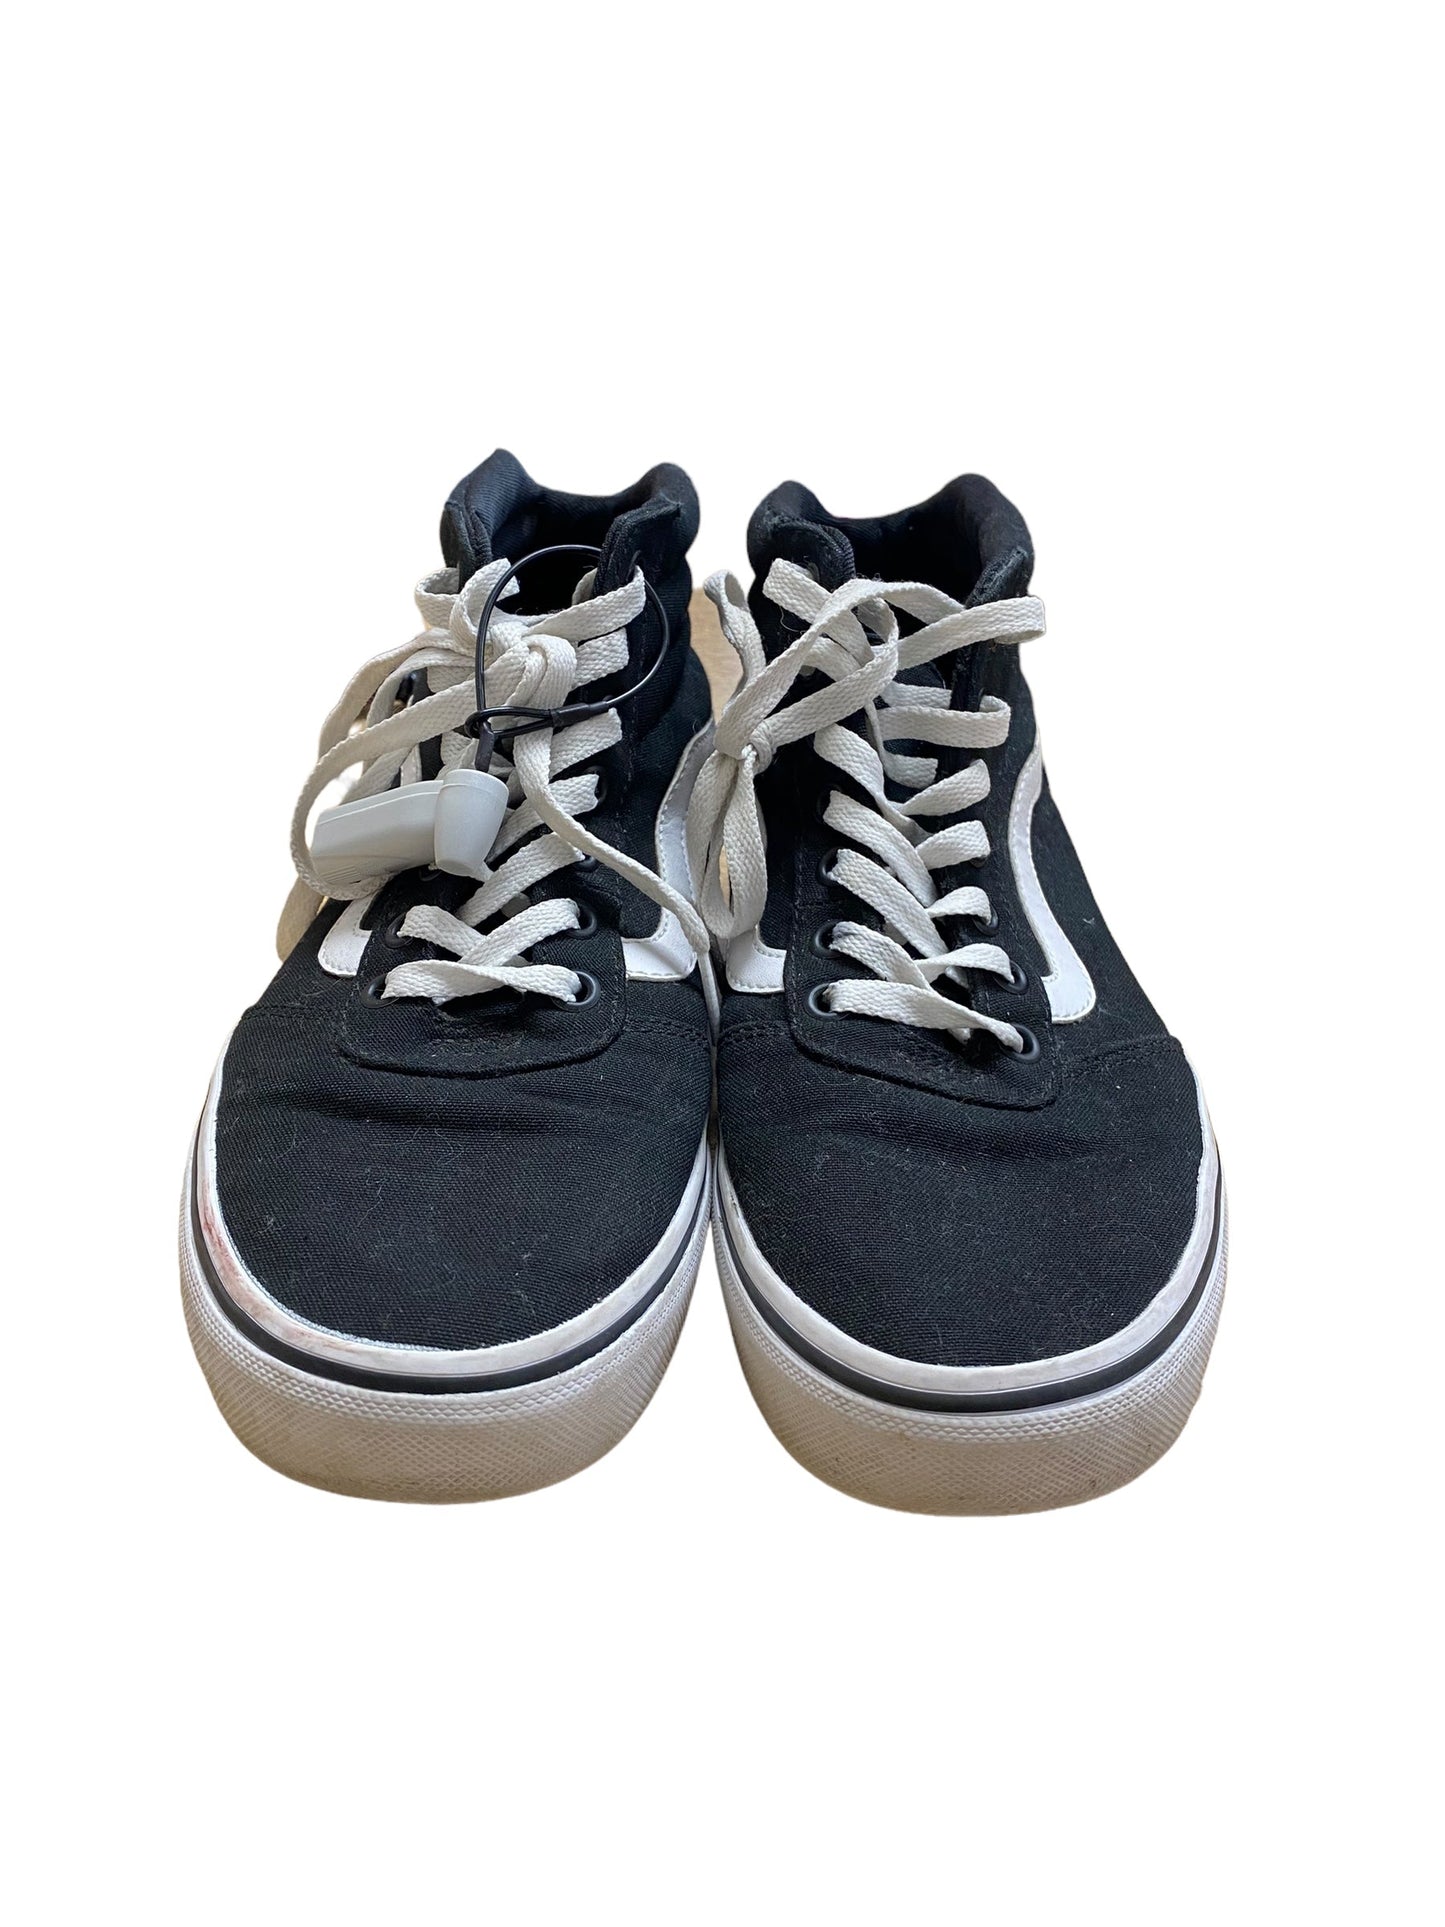 Shoes Athletic By Vans  Size: 9